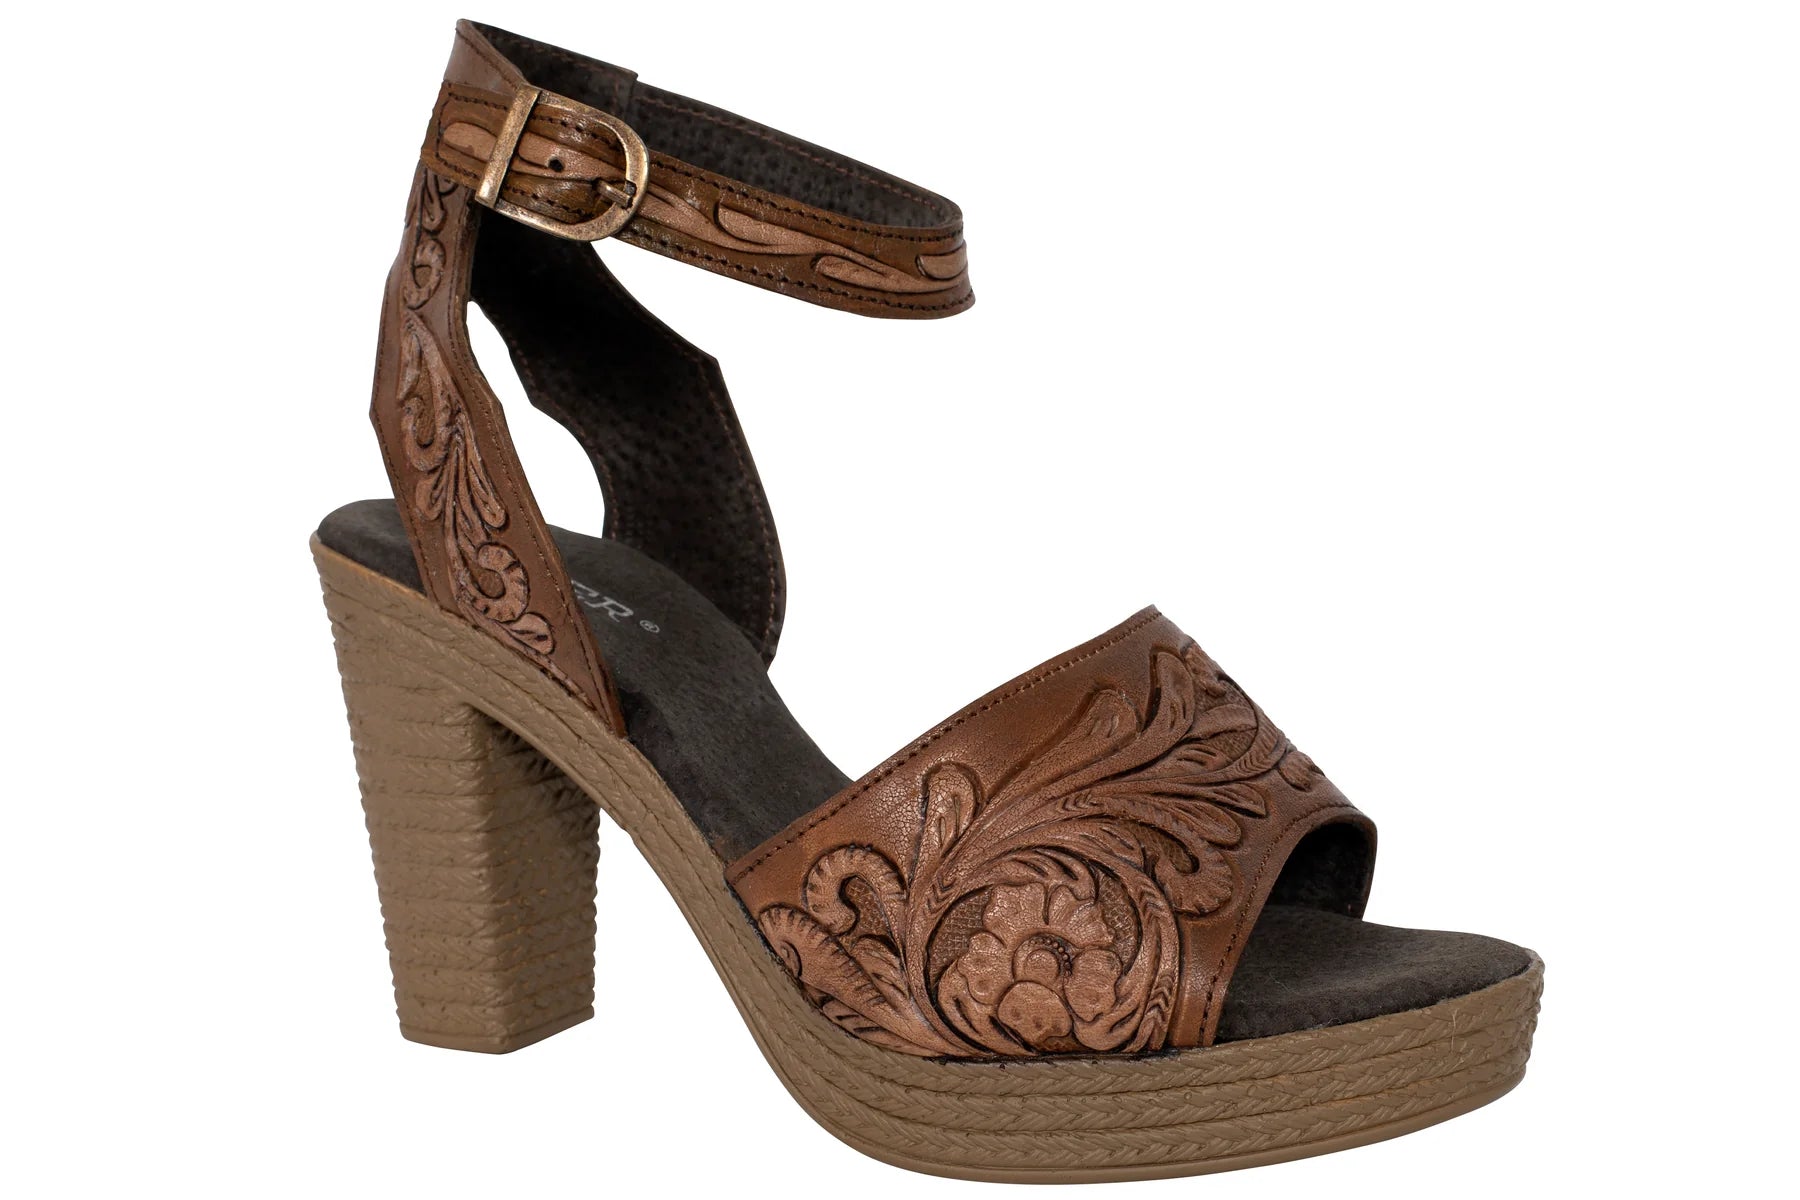 09-021-0946-3235 Roper Ladies Mika Ankle Strap Sandal Brown/Tan Tooled Leather